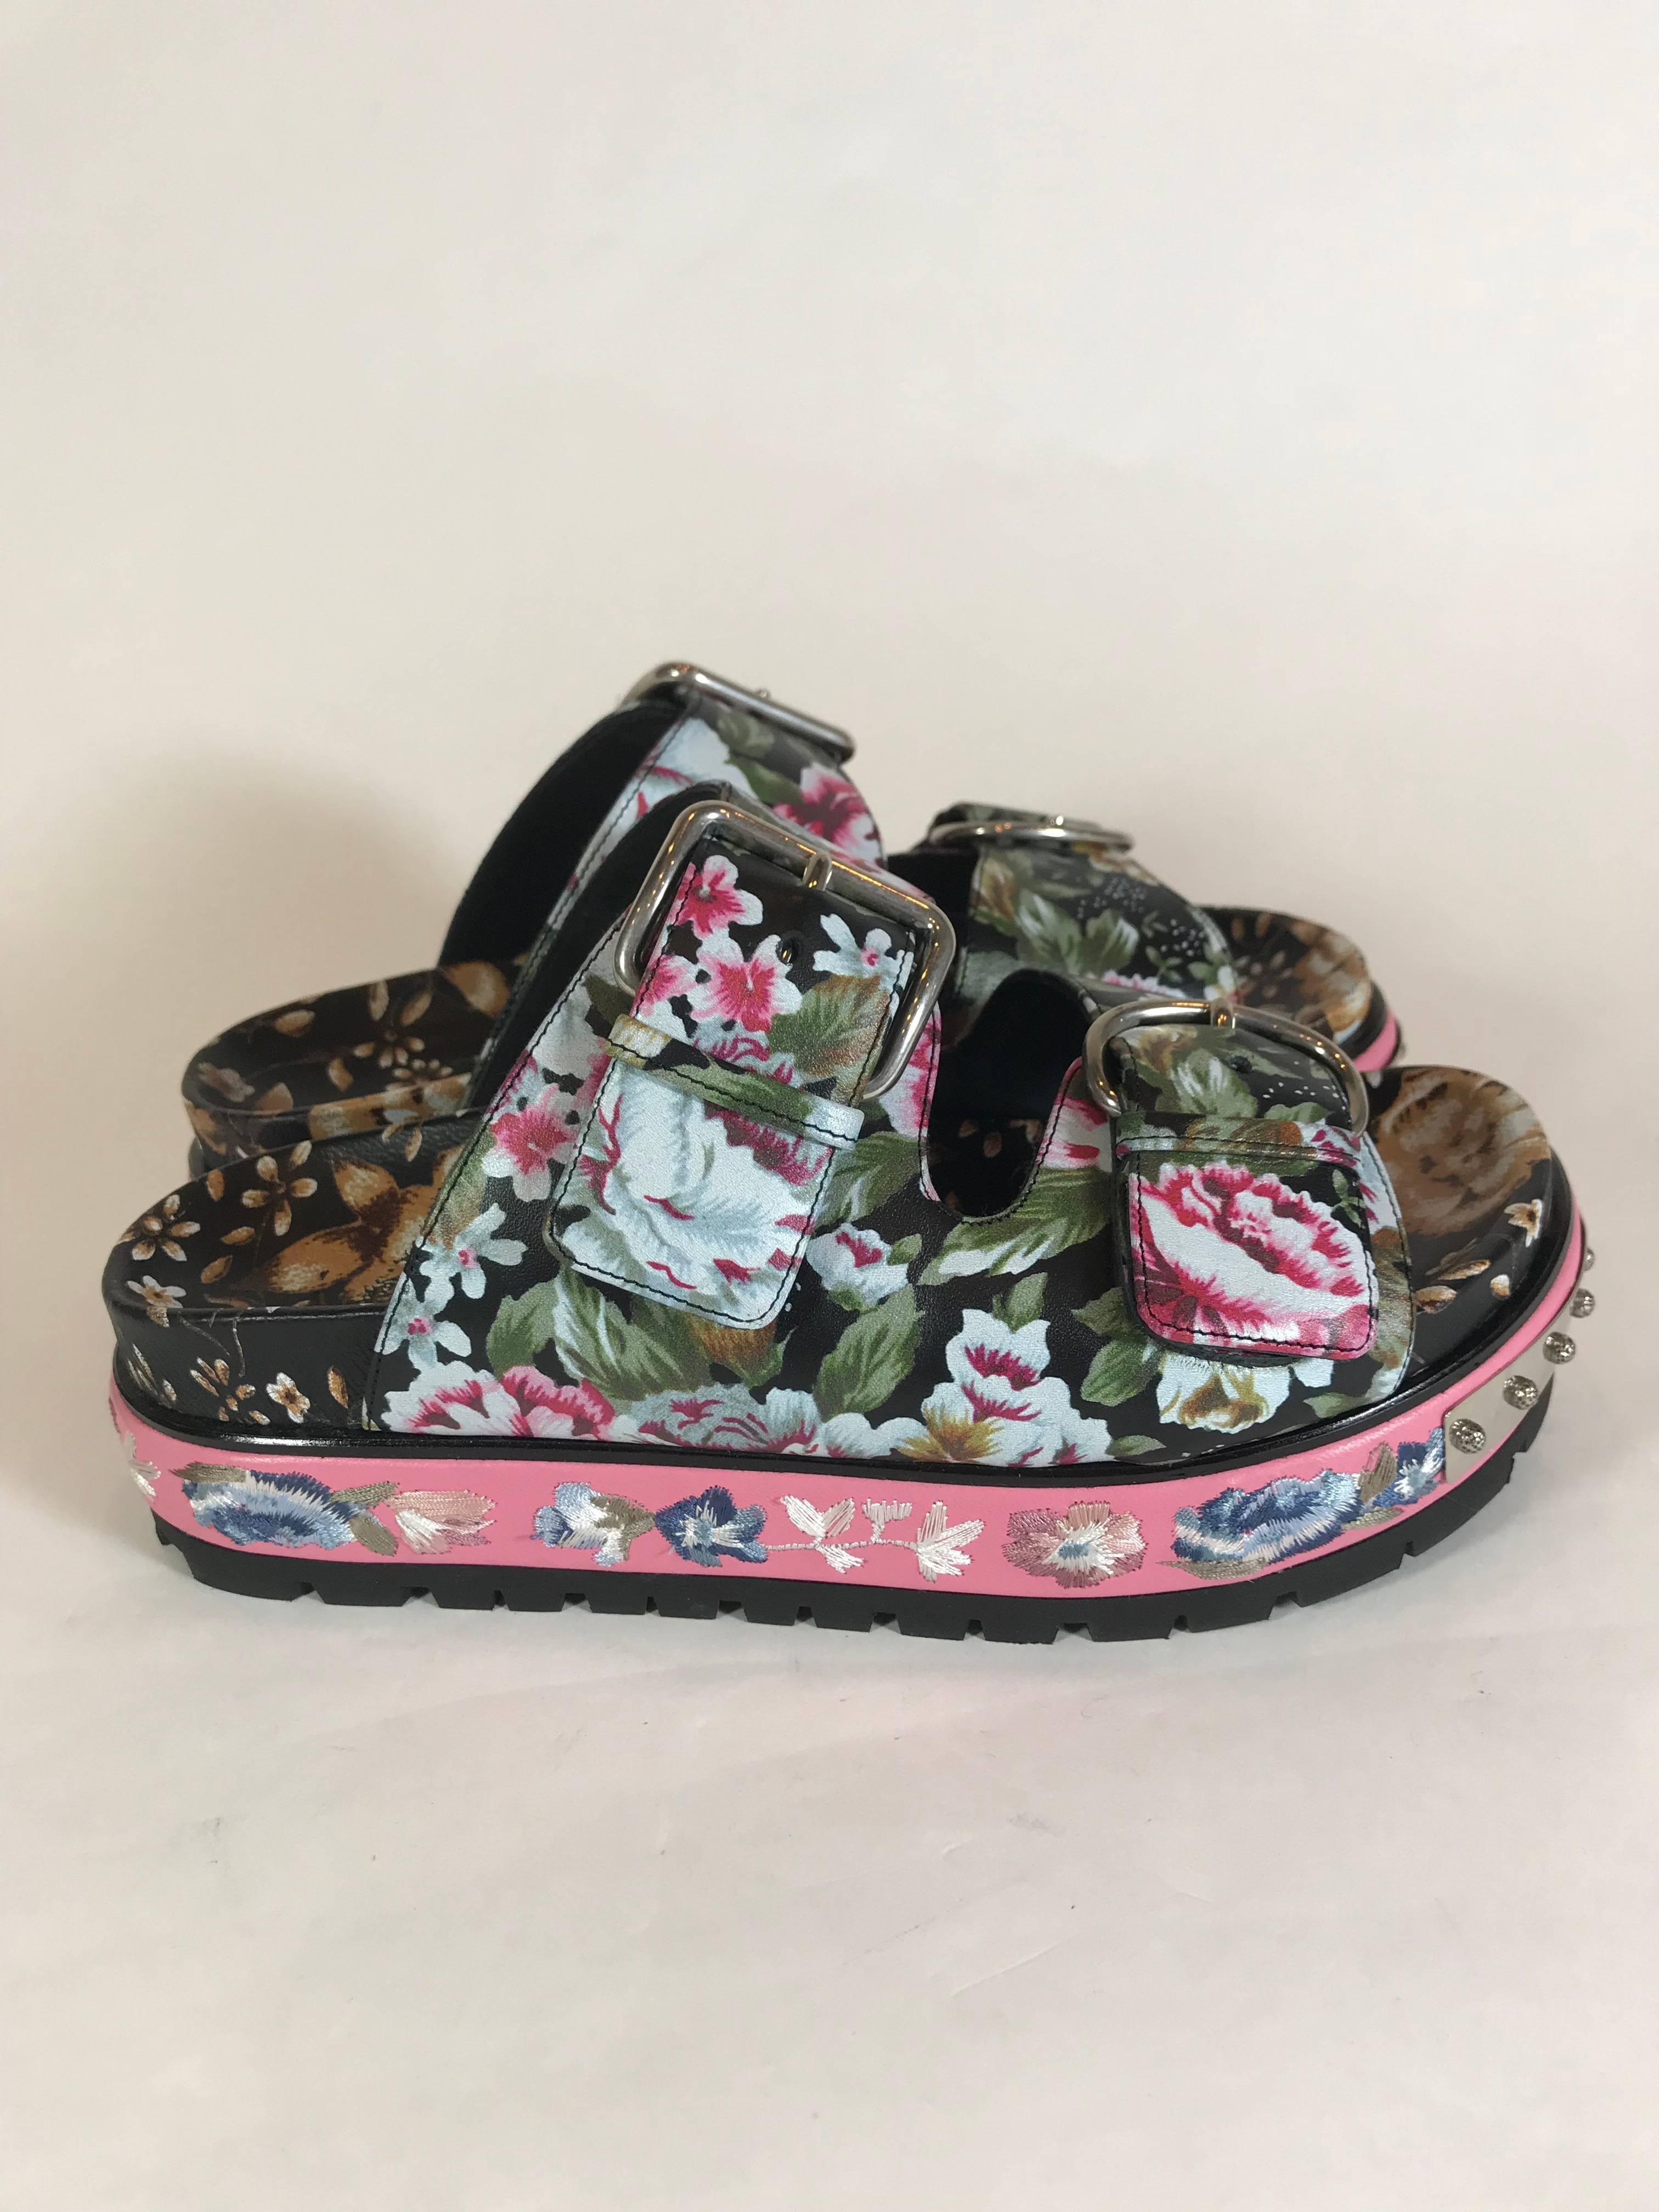 Multicolored leather floral print sandals from Alexander McQueen featuring side buckle fastenings, a branded insole, silver-tone stud detailing, a ridged rubber sole and embroidered details. Size: 7 1/2